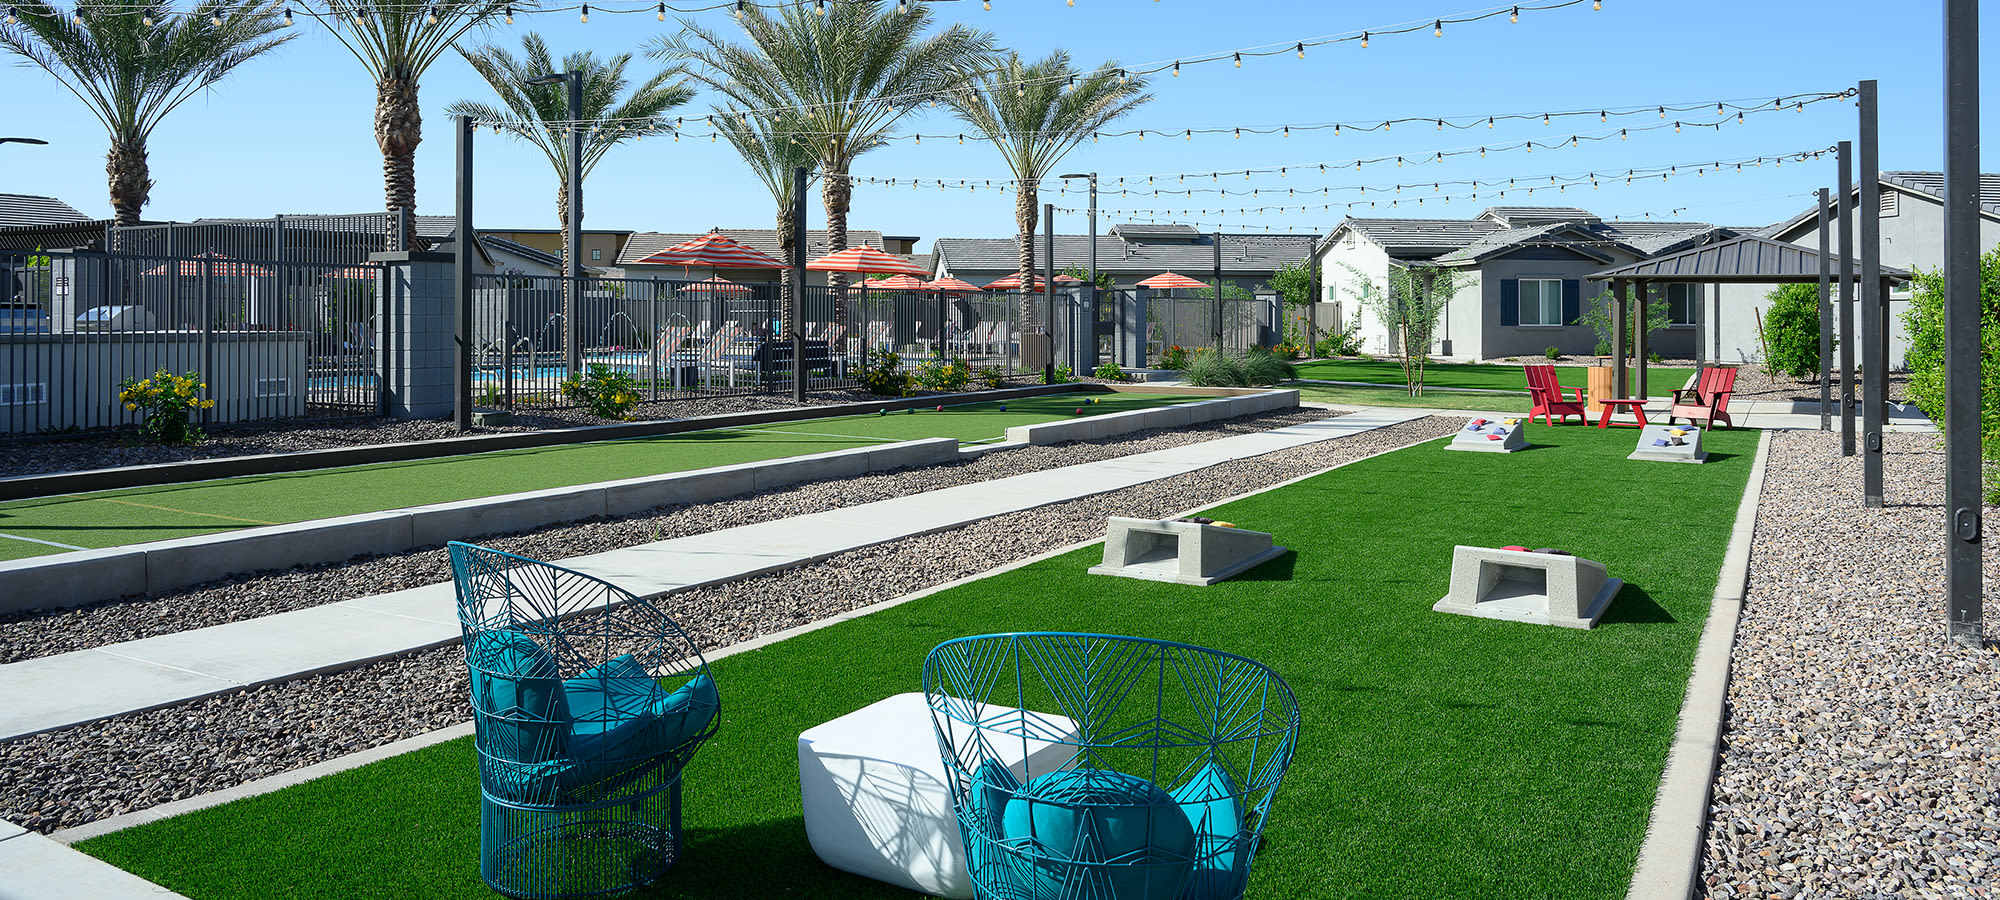 Outdoor Bocce Court and Cornhole at FirstStreet Ballpark Village in Goodyear, Arizona